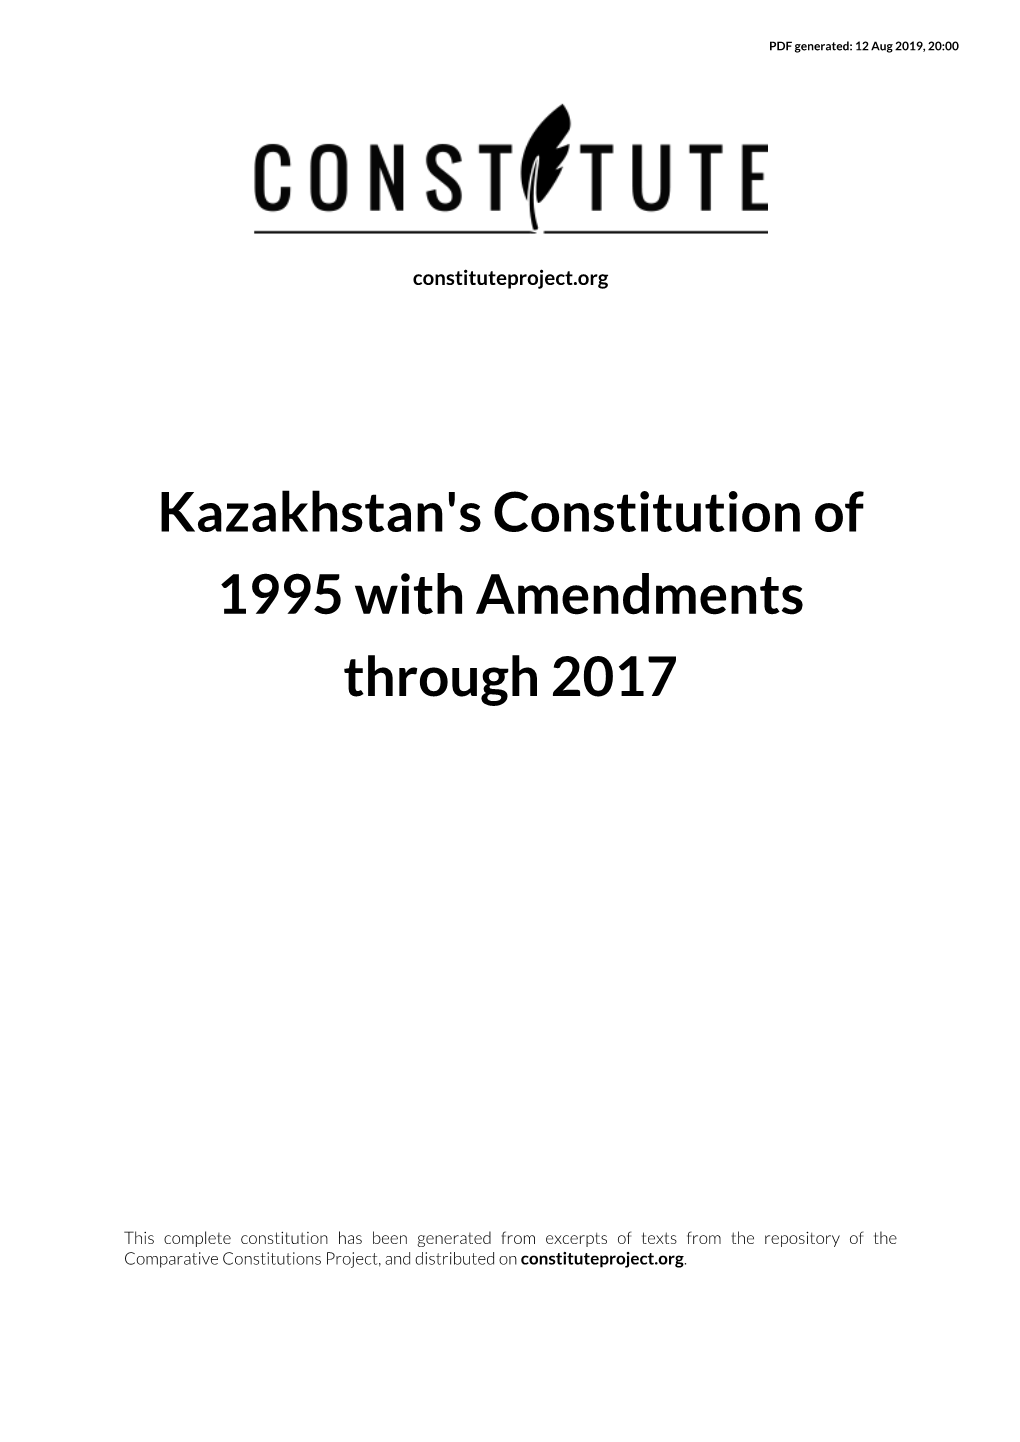 Kazakhstan's Constitution of 1995 with Amendments Through 2017